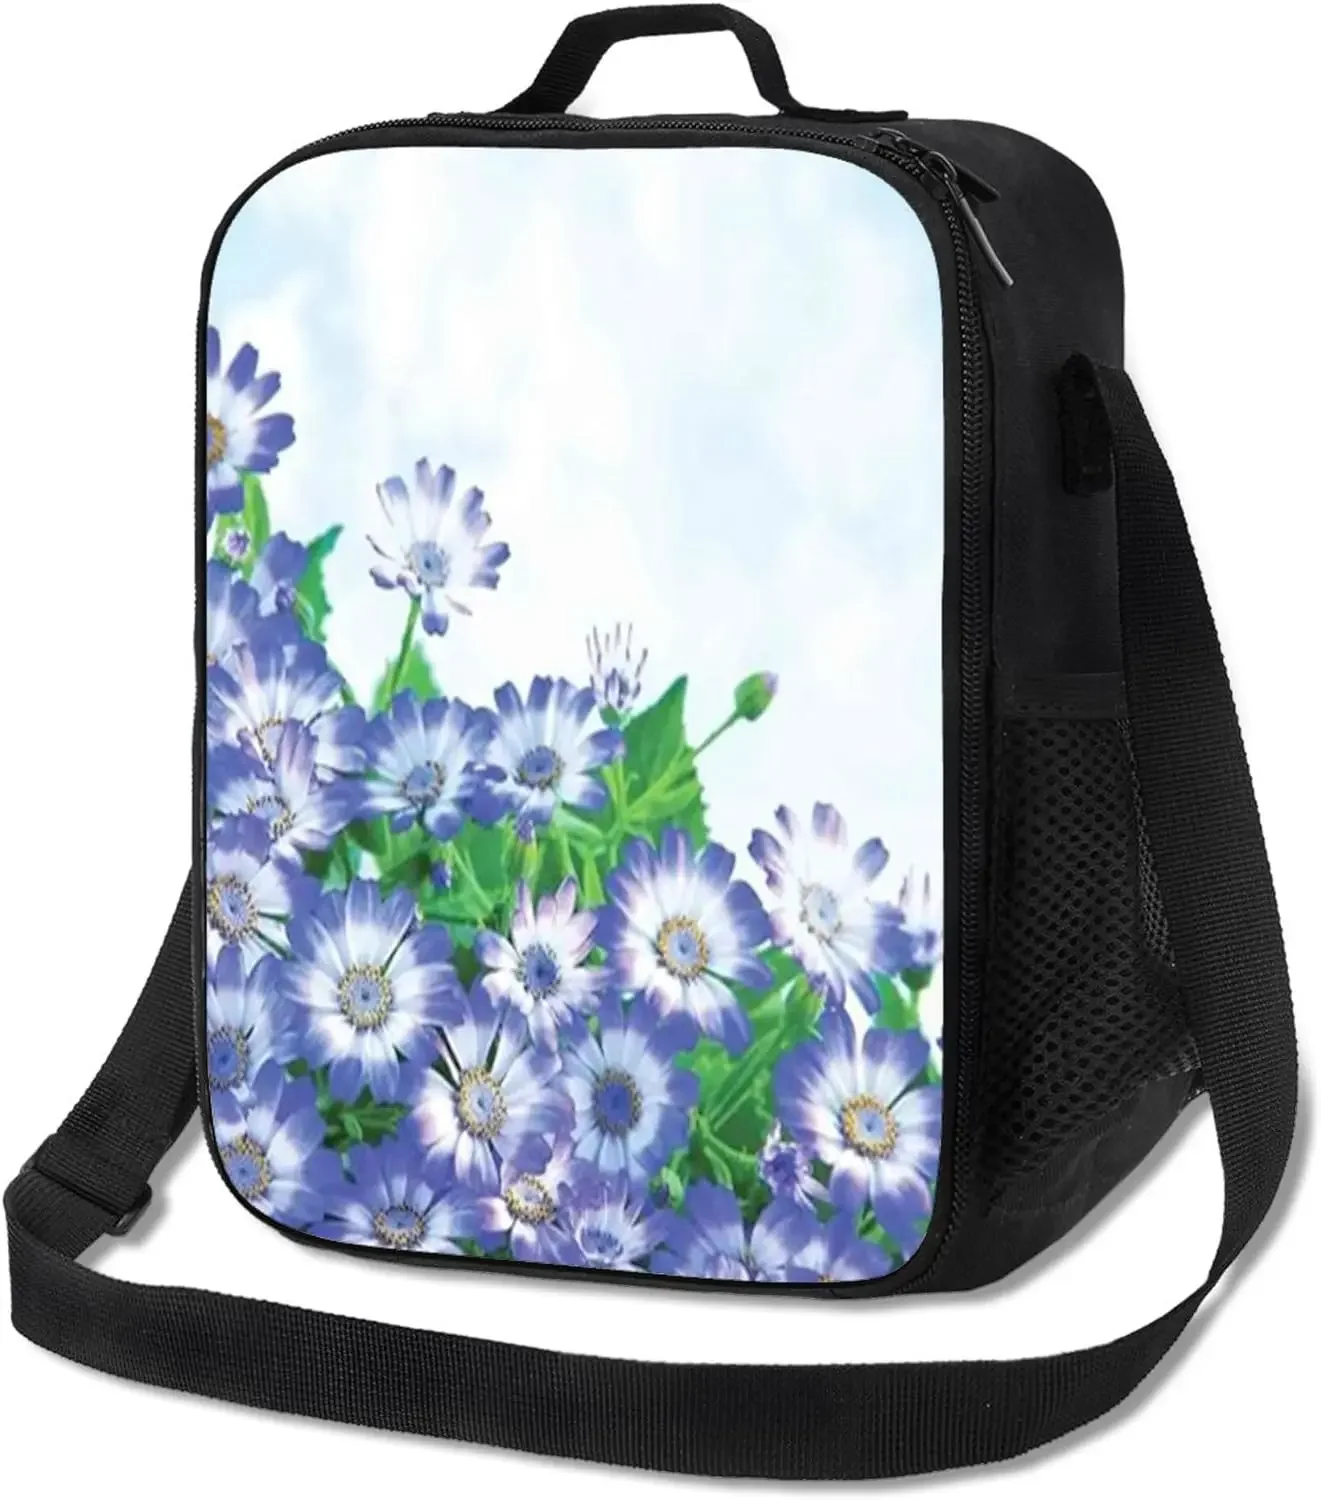 

Insulated Floral Blue Daisy Border Fresh Spring,Reusable Leakproof Lunch Box for Adult Office Lunch Tote Bag Fit Travel Picnic